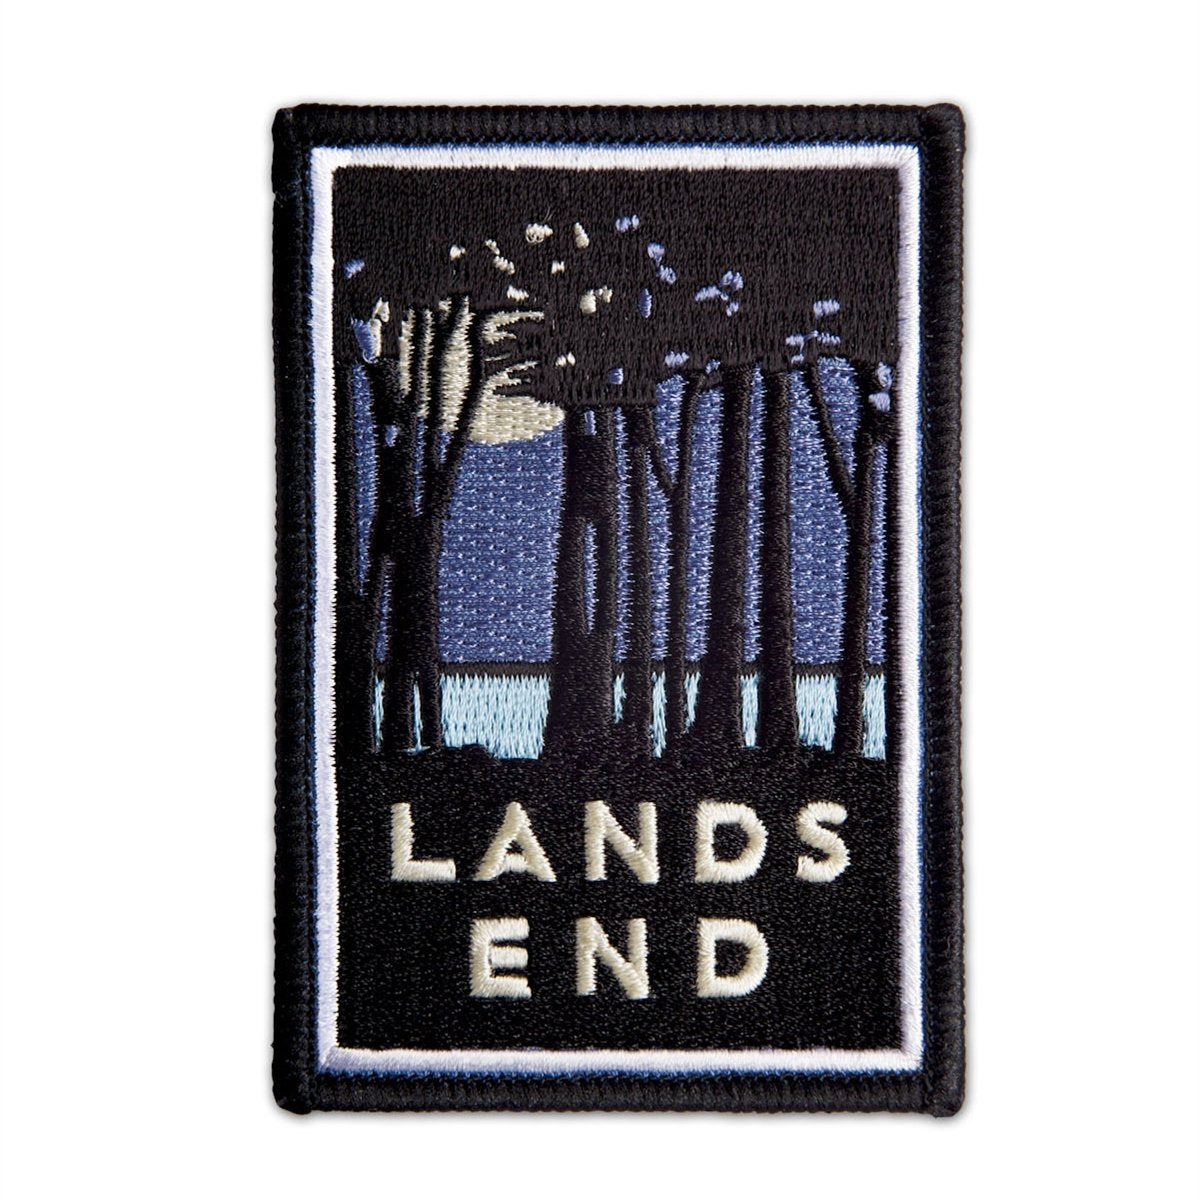 Multicolor embroidered patch featuring design of San Francisco's Lands End, based on artwork by Michael Schwab.